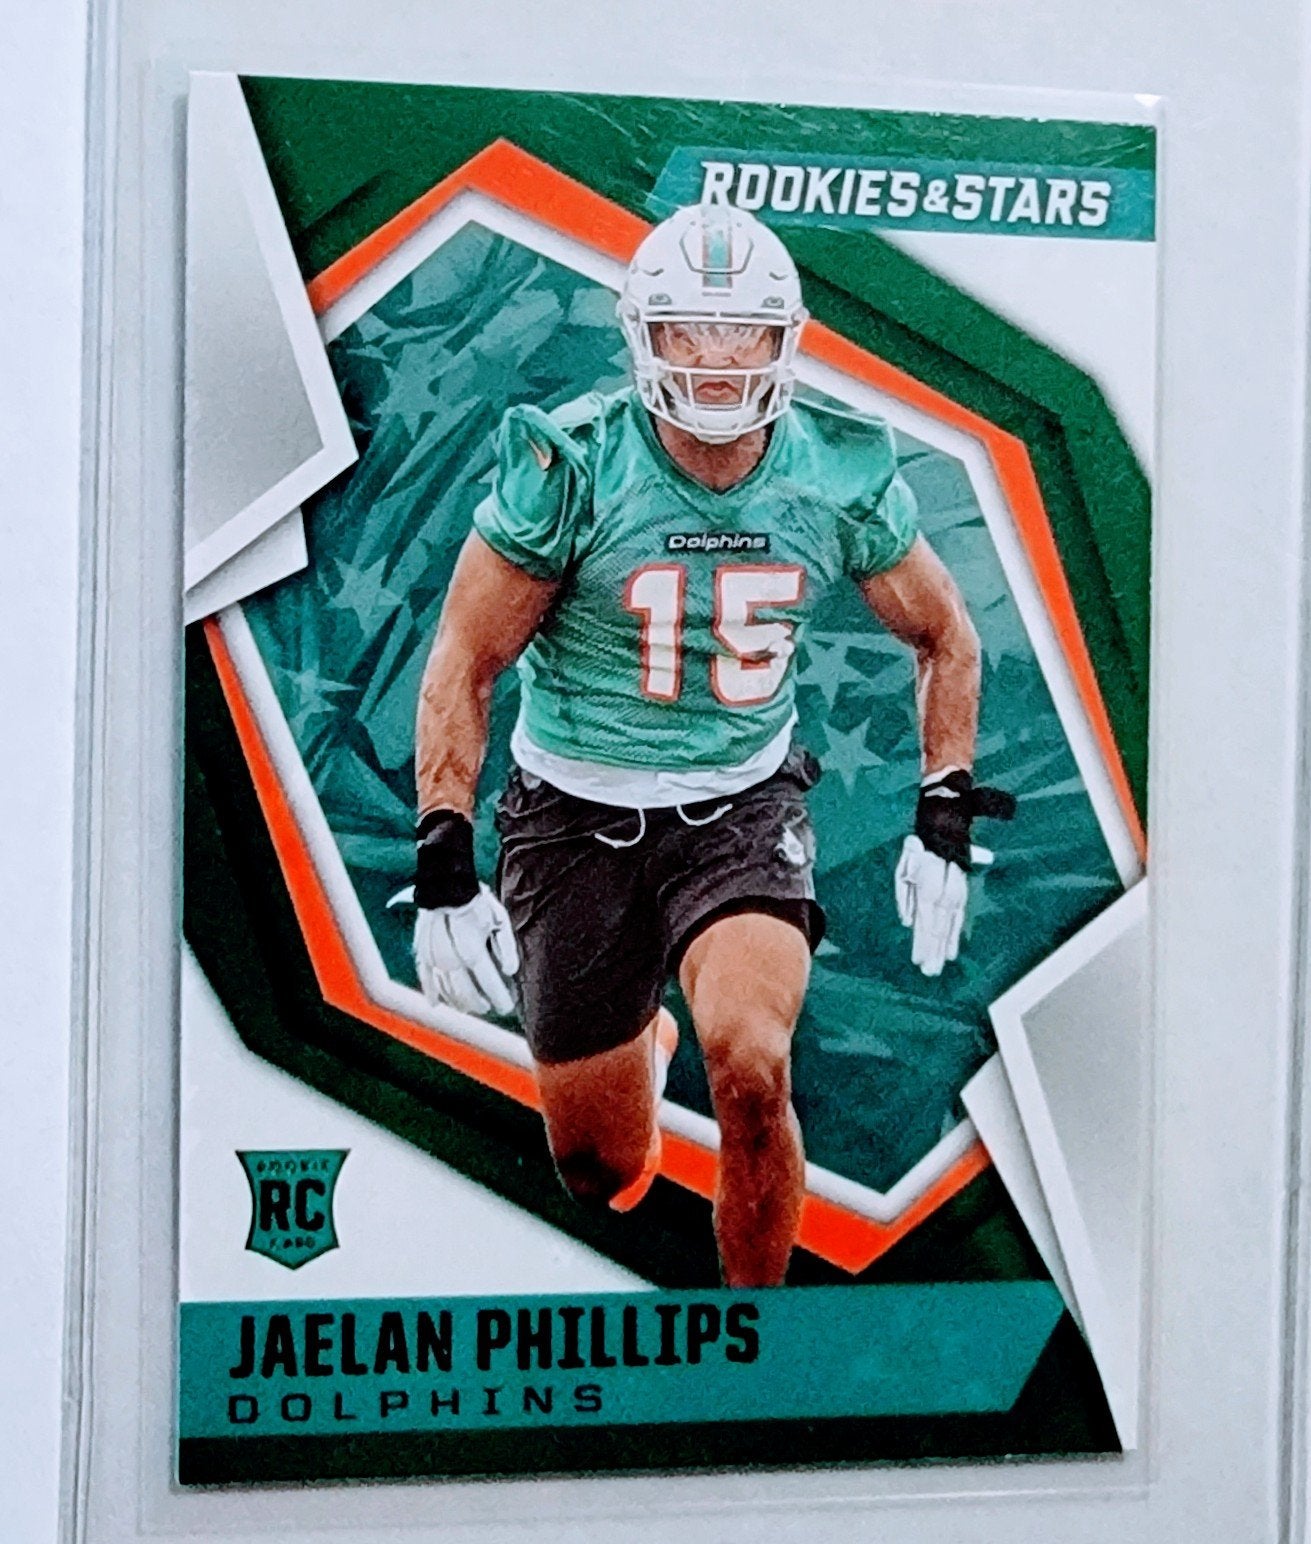 2021 Panini Rookies and Stars Jaelyn Phillips Green Rookie Football Card AVM1 simple Xclusive Collectibles   